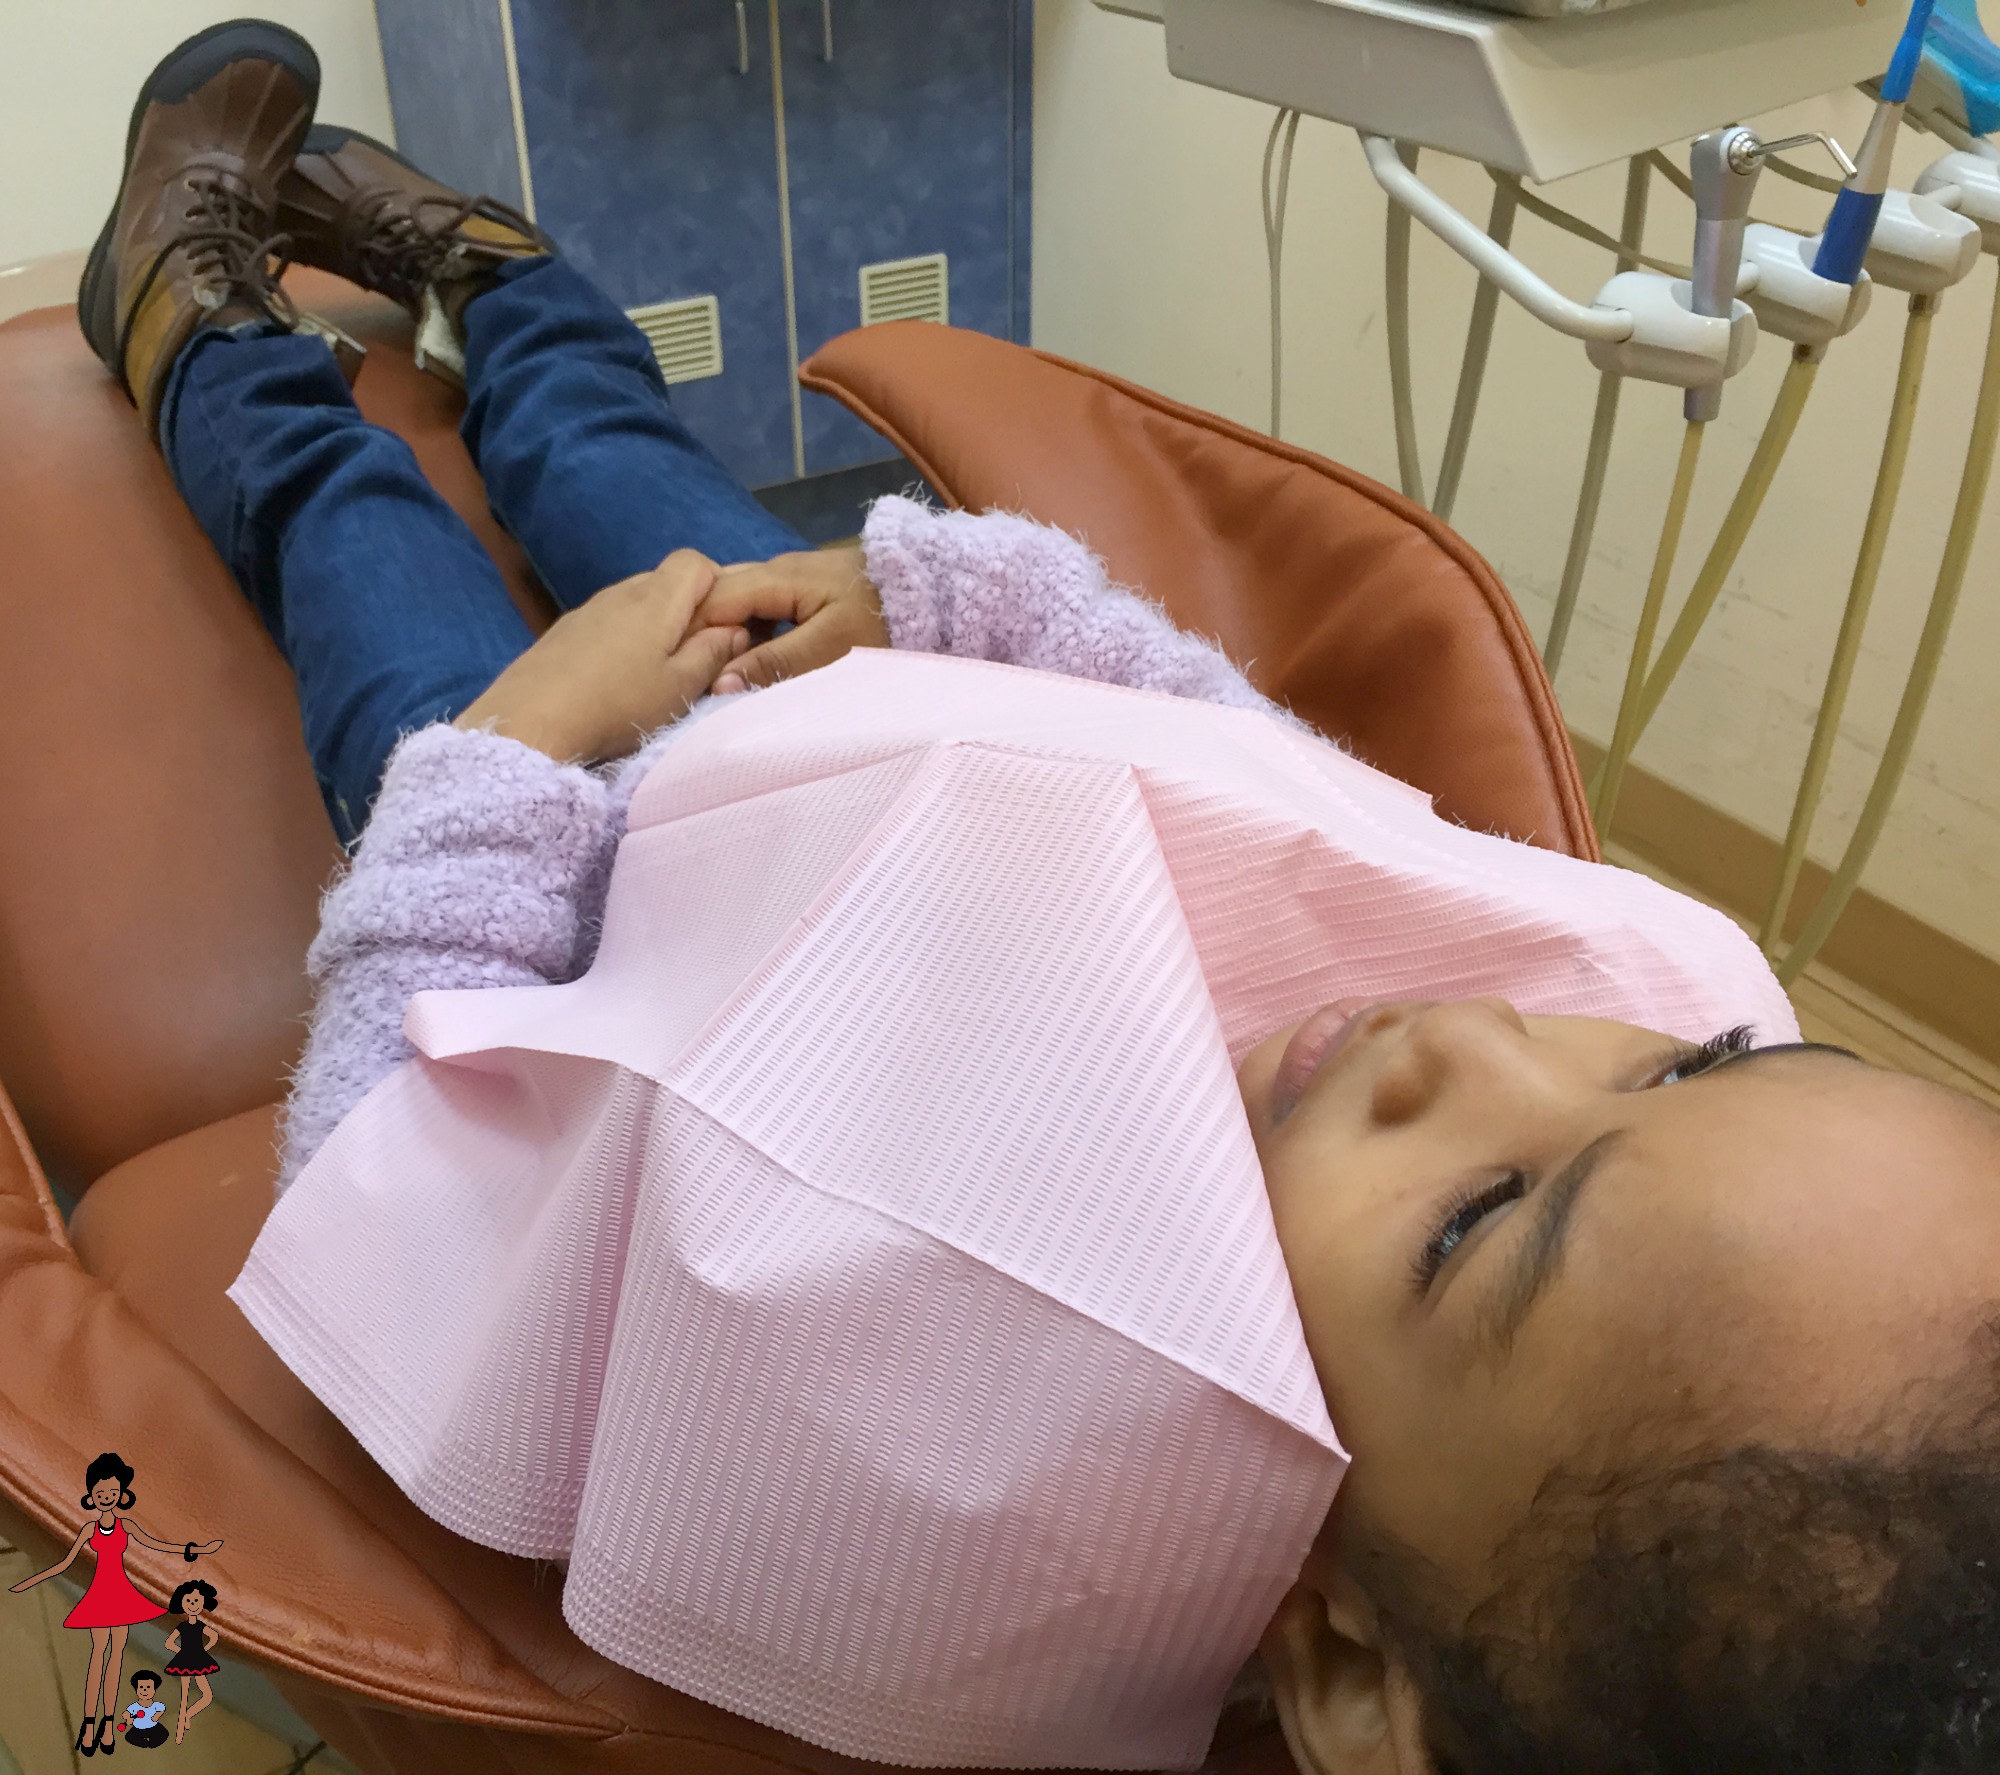 How to prepare your child for a dentist visit